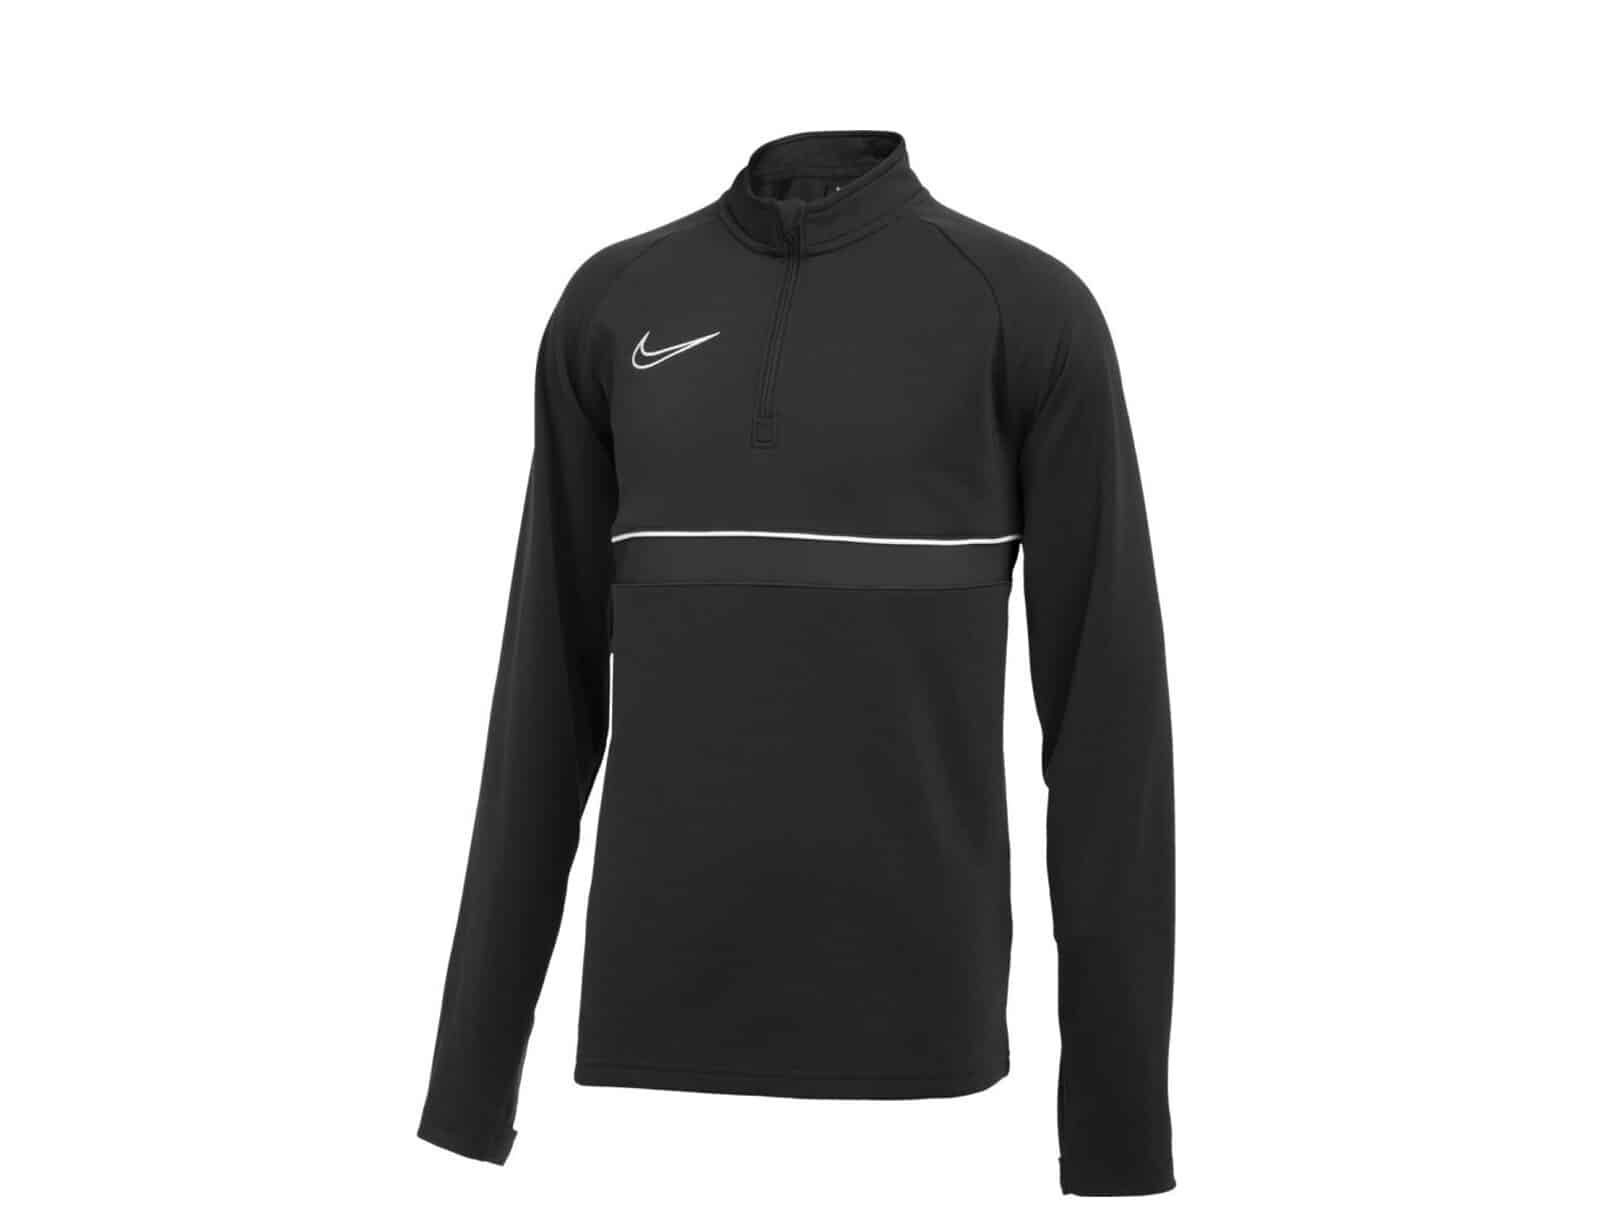 Nike - Academy 21 Drill Top Junior - Voetbal Top